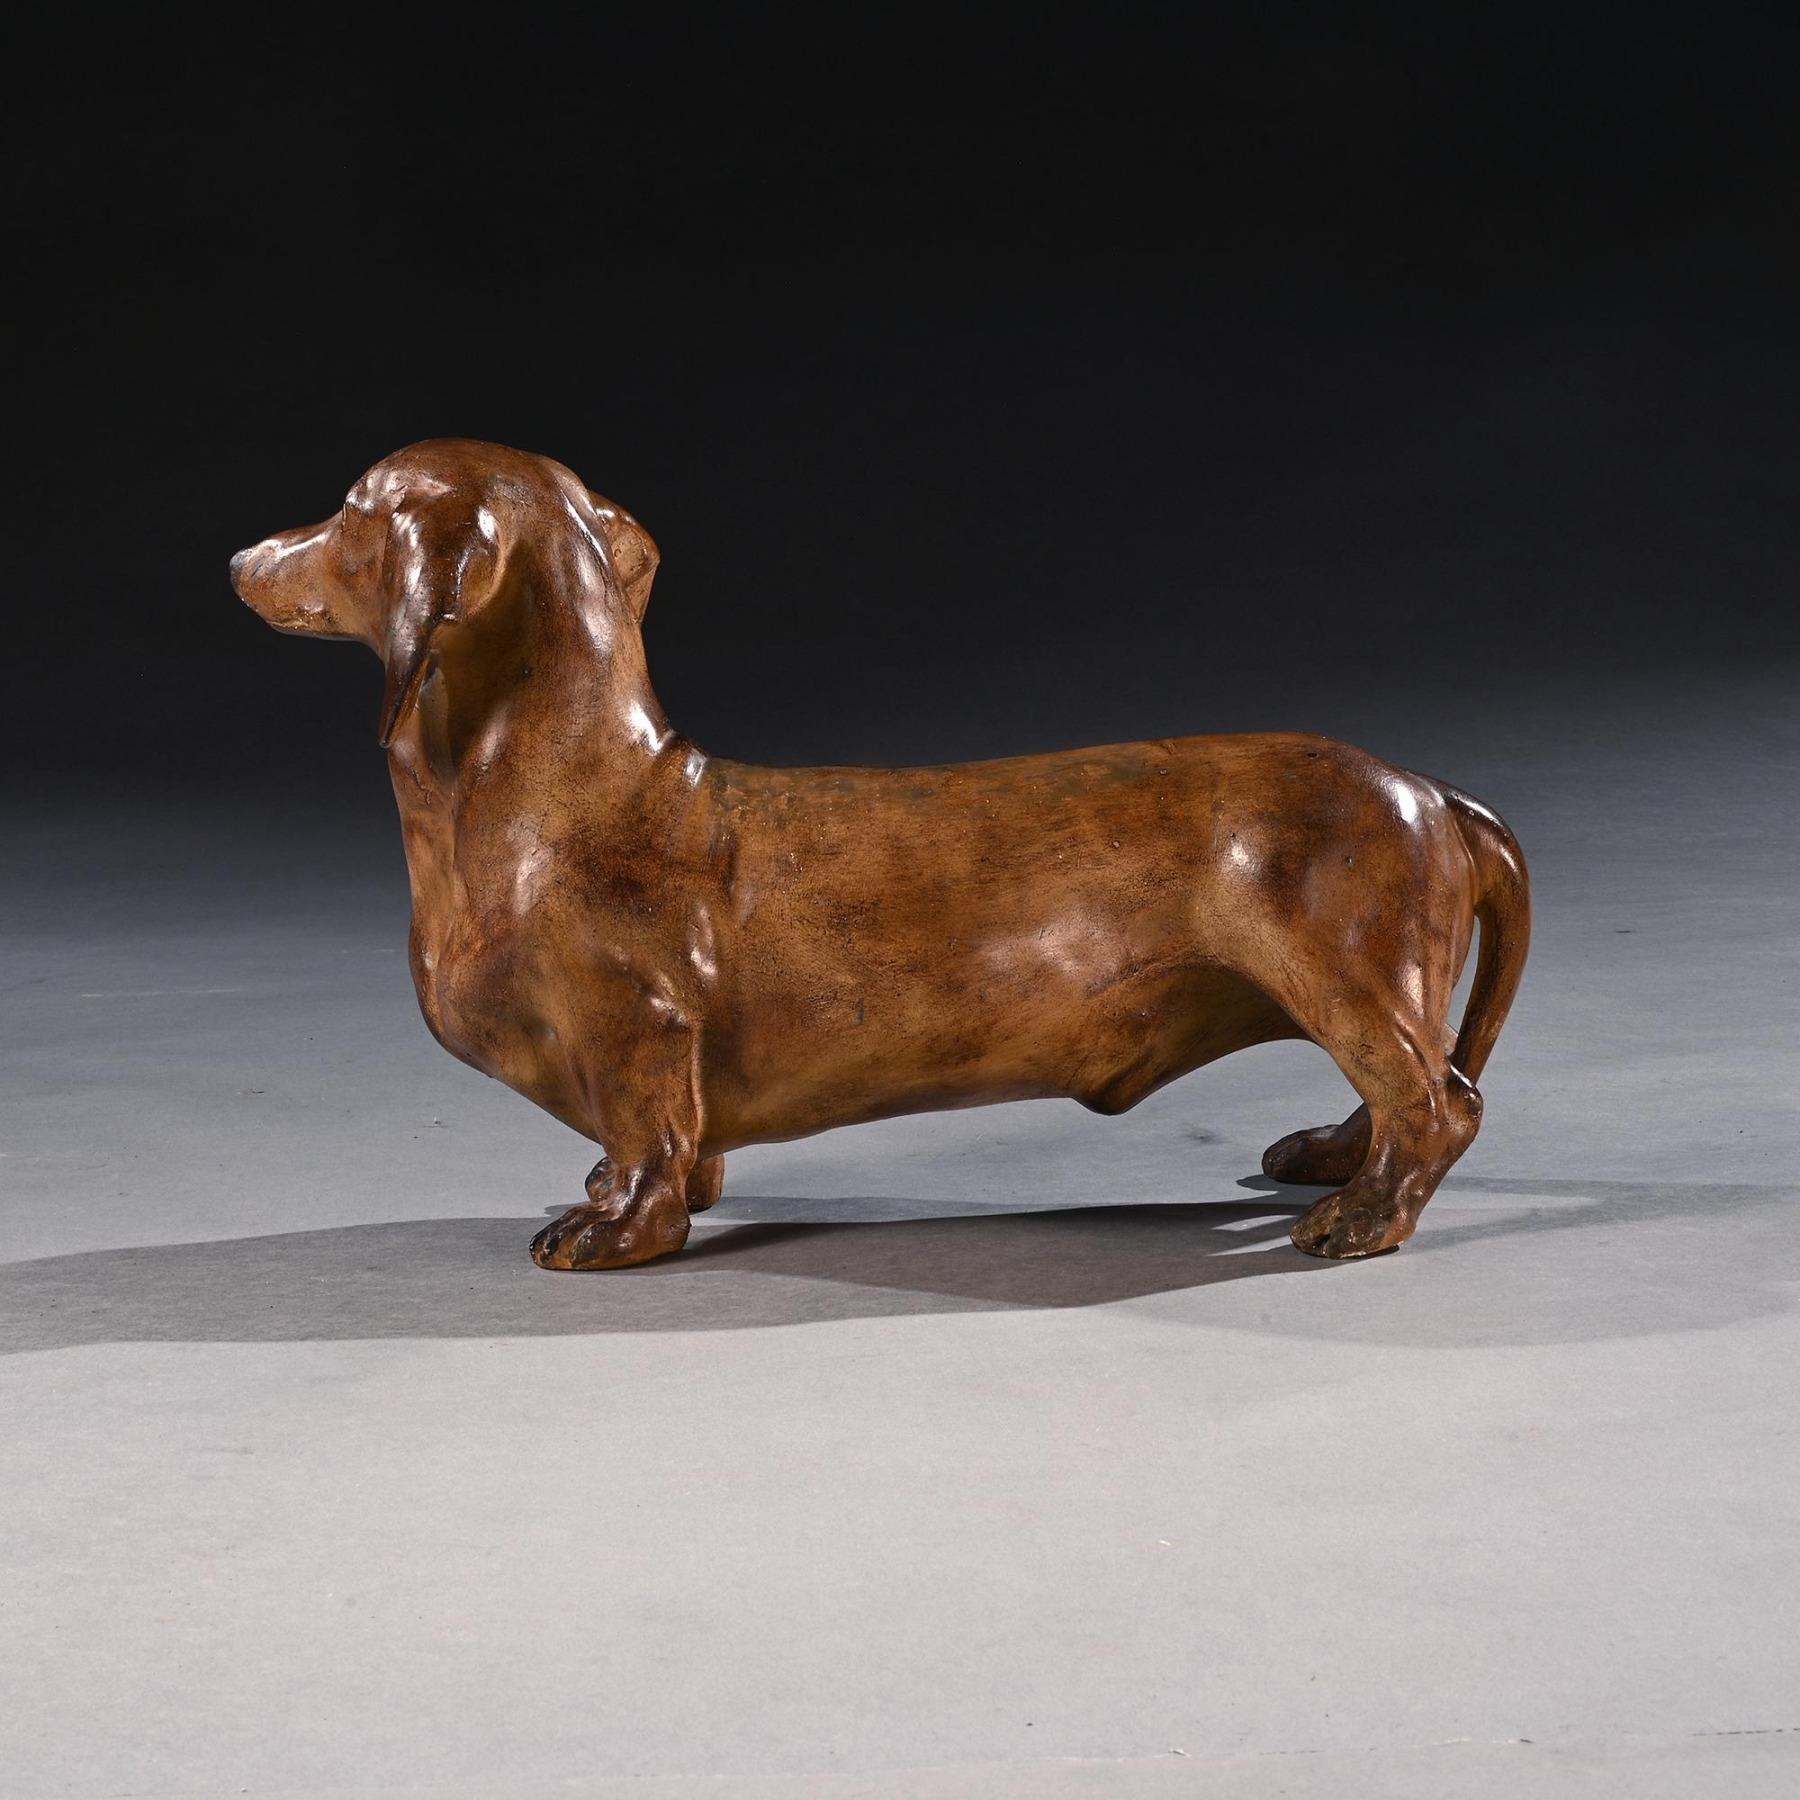 Ceramic Rare French Life-like Glazed Terracotta Sculpture of a Dachshund Dog For Sale